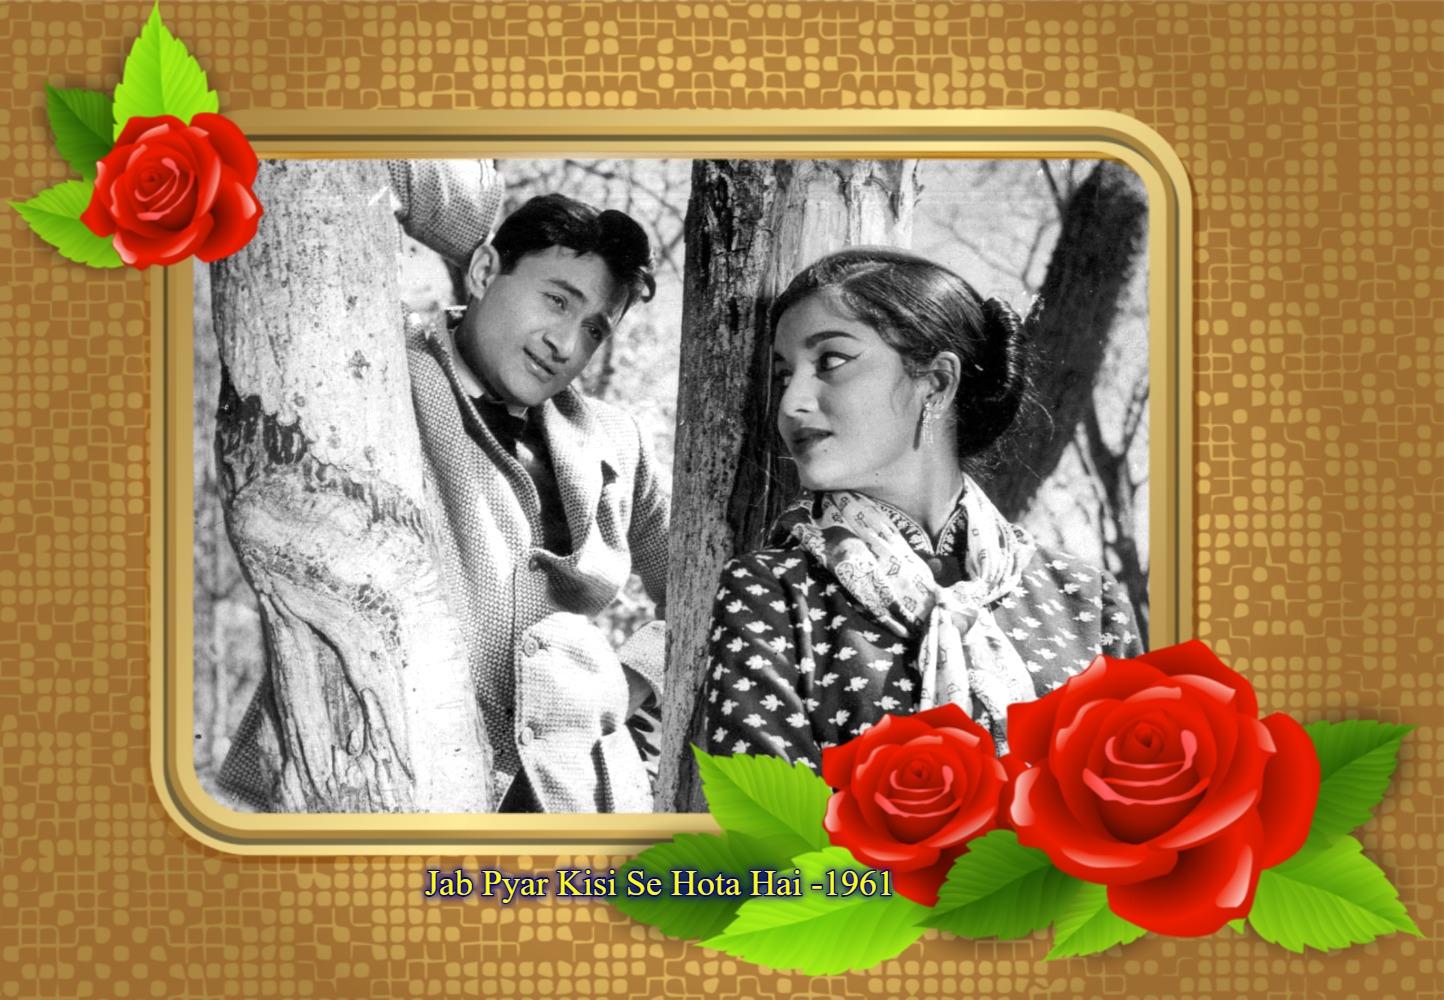 Read more about the article “The Evergreen & Dashing Matinee Idol Dev Anand”